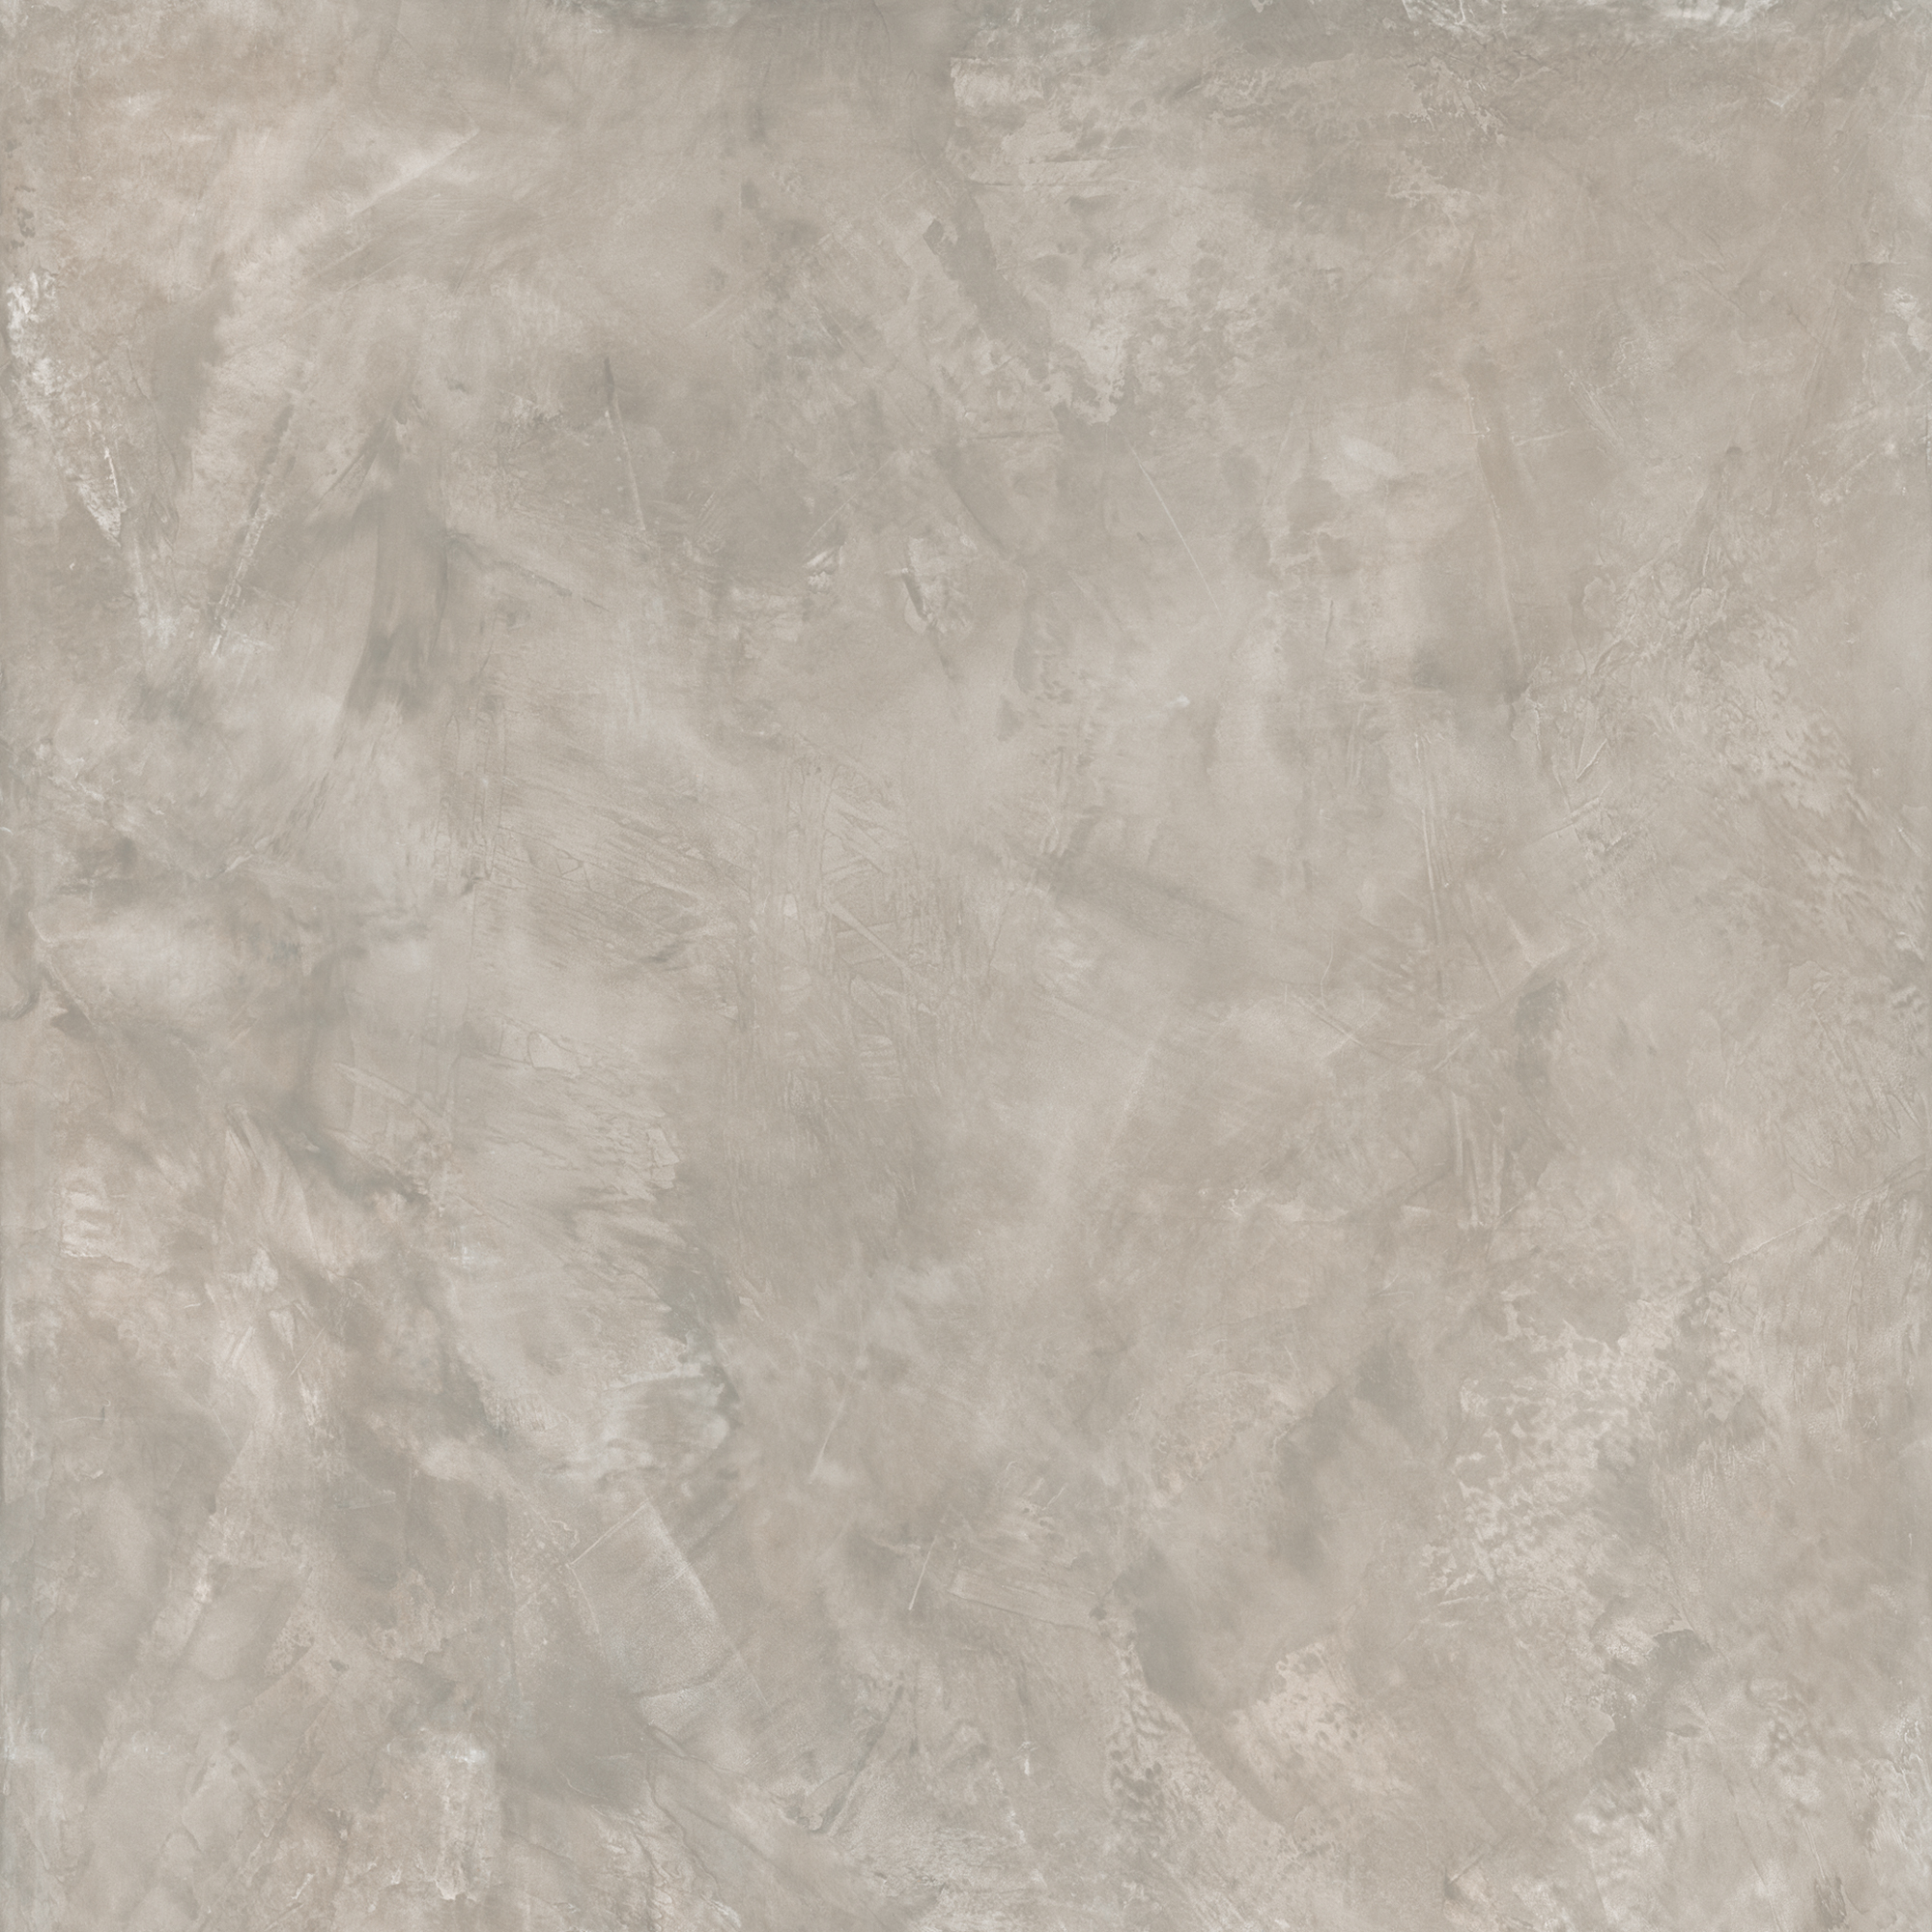 Caesar Join Manor Soft AFCH 120x120cm rectified 9mm